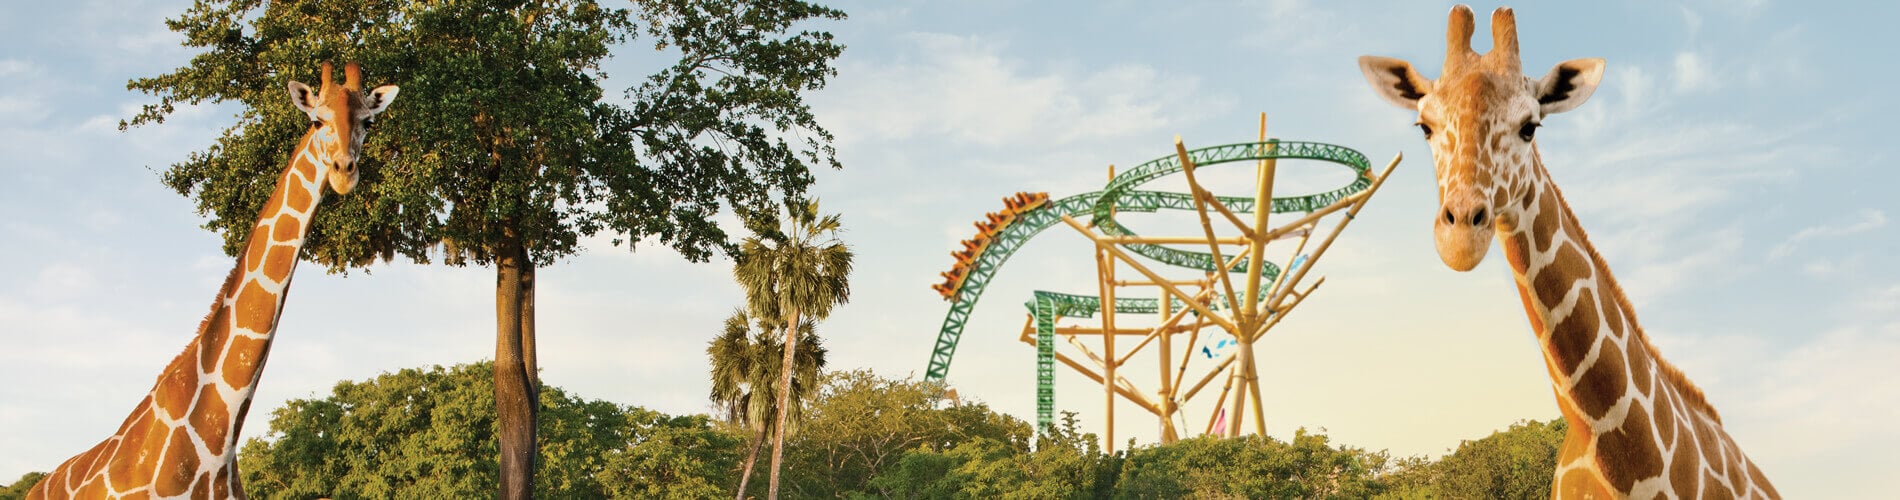 Two giraffes and a roller coaster at Busch Gardens Tampa Bay animal theme park, located in Florida